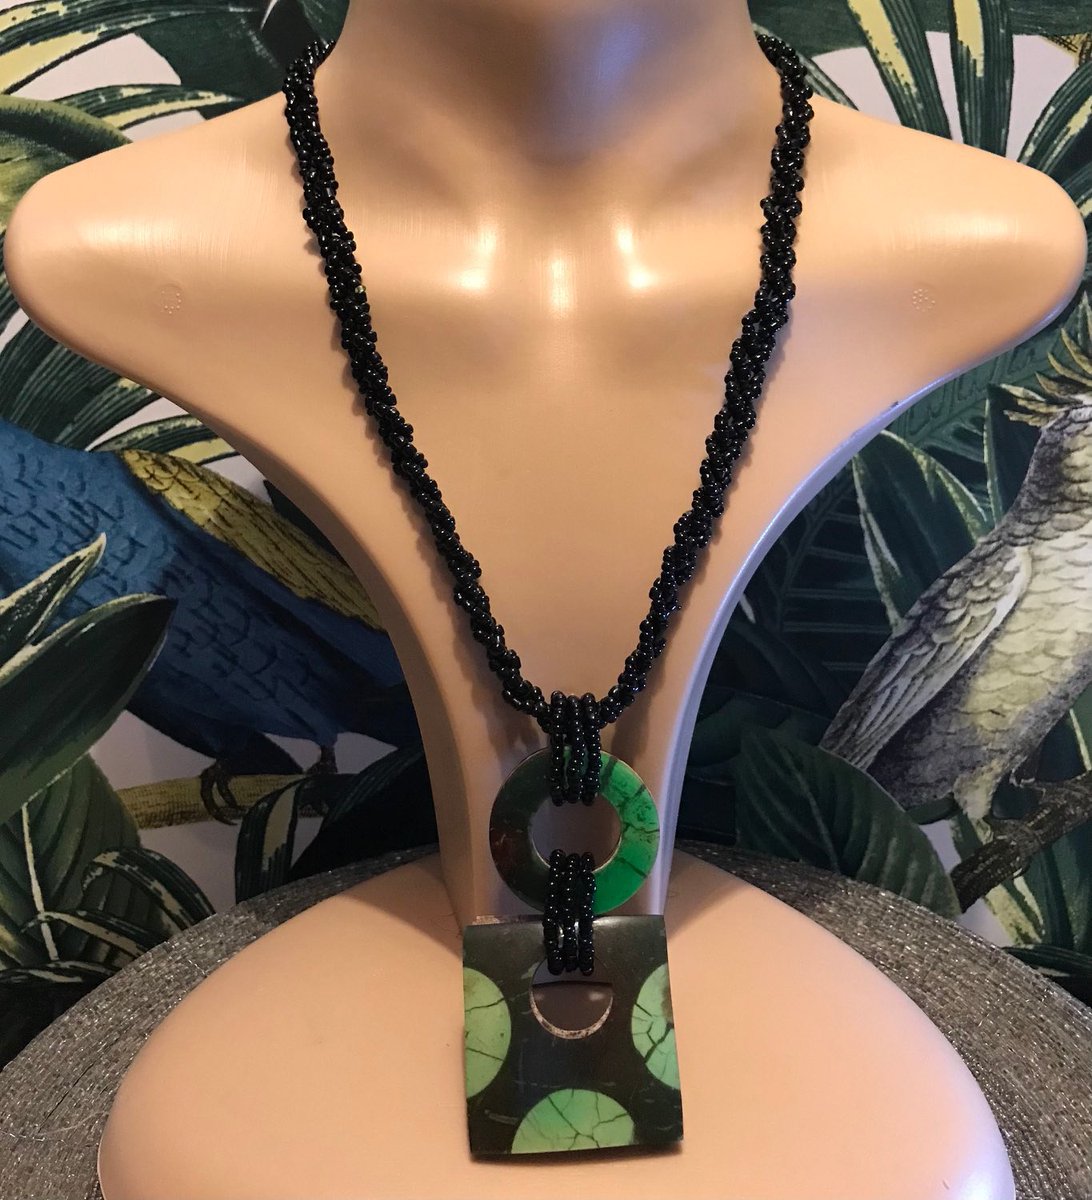 Excited to share the latest addition to my #etsy shop: Green and brown wood and bead pendant necklace boho / summer / holiday / beach etsy.me/47RX0gu #brown #beachtropical #green #wood #bead #beach #holiday #summer #folk